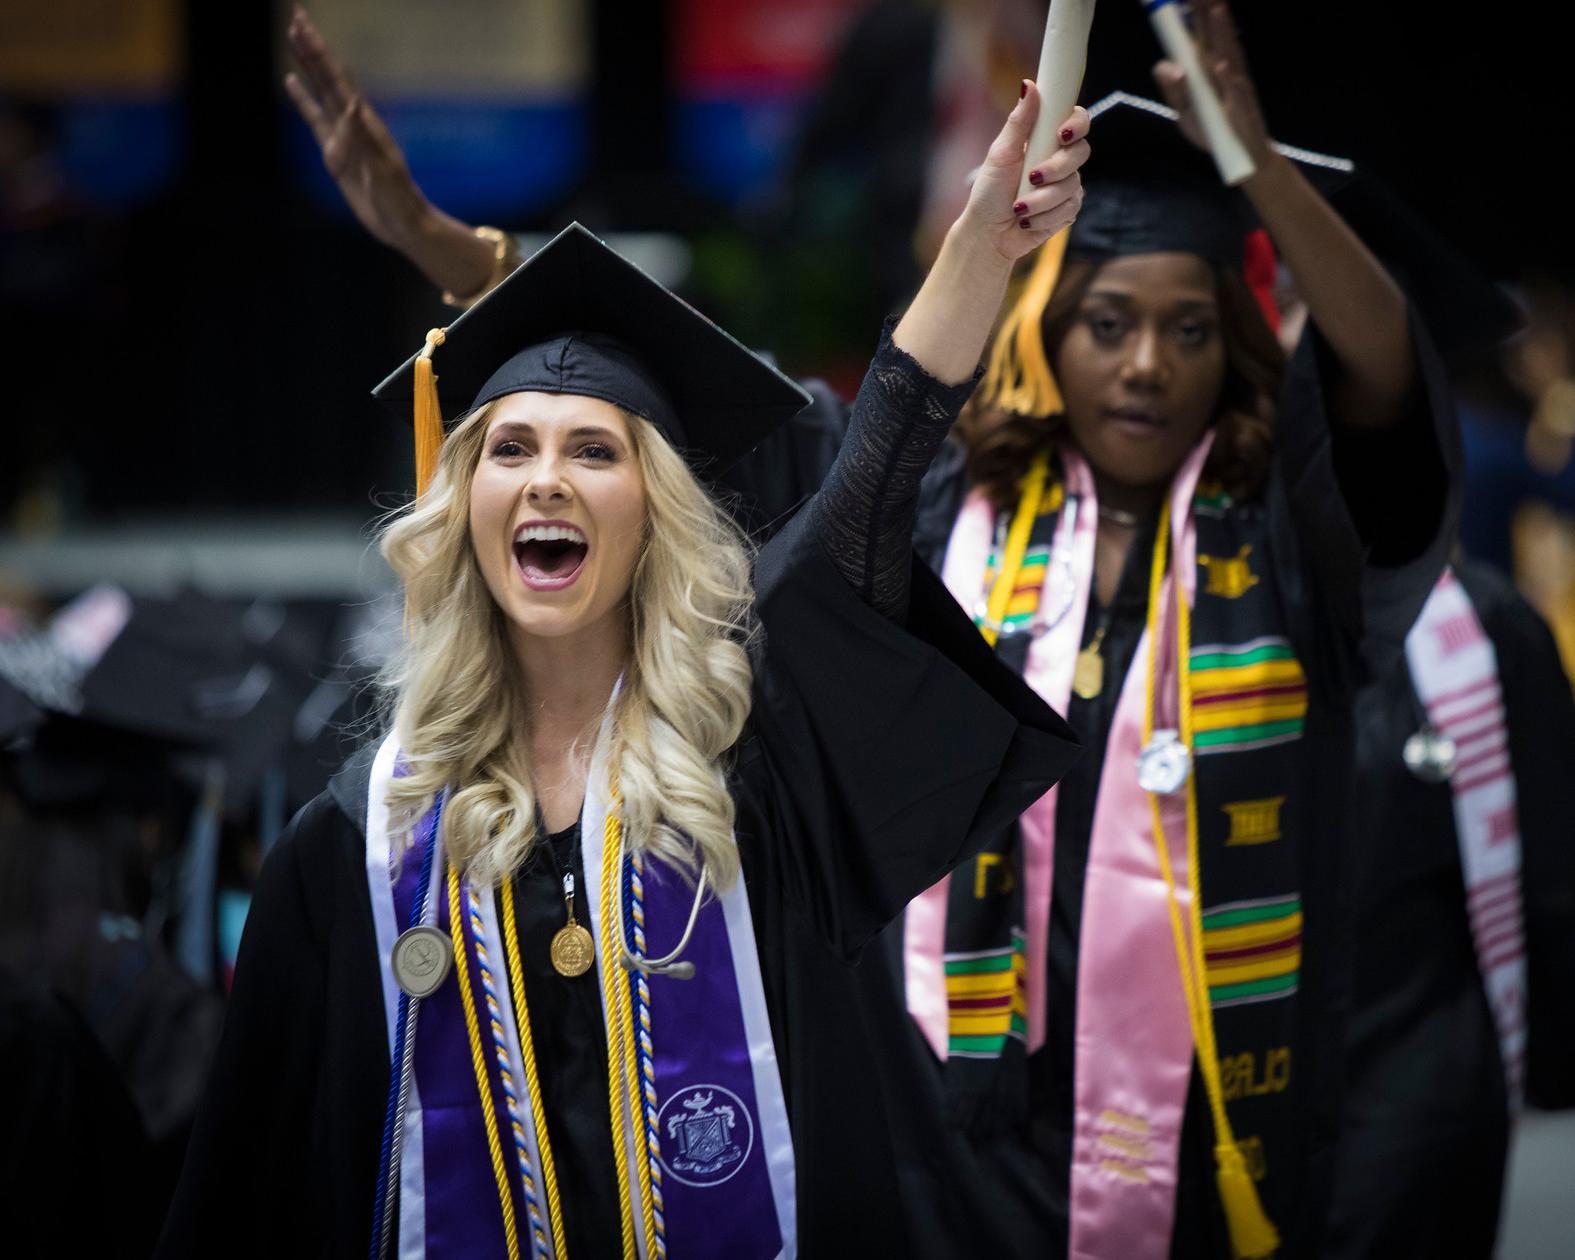 two women (one White and one African-American) walking with their diplomas